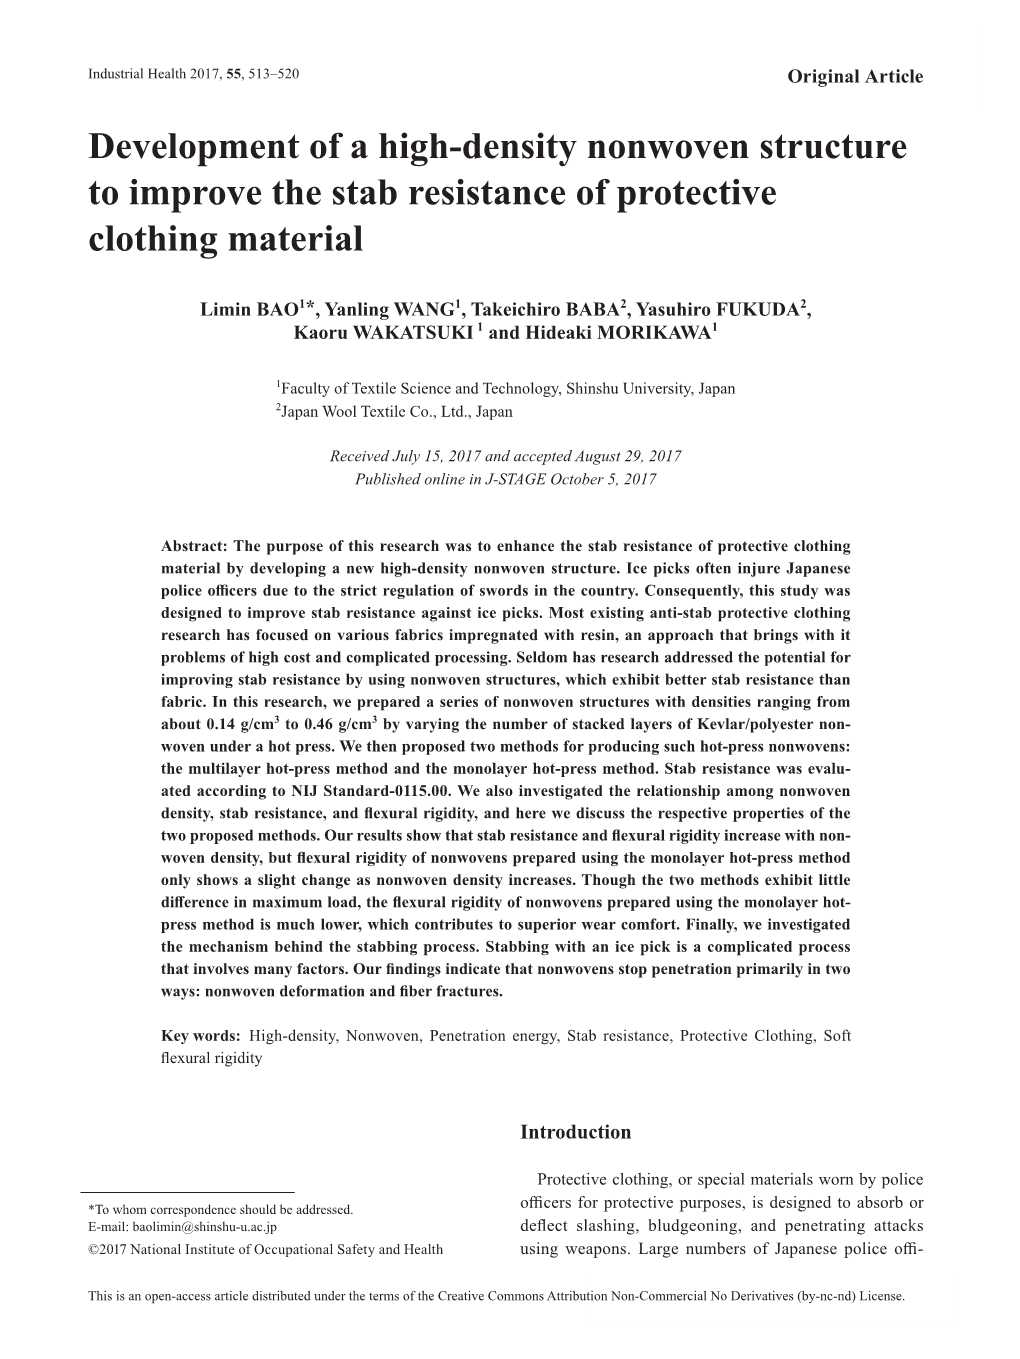 Development of a High-Density Nonwoven Structure to Improve the Stab Resistance of Protective Clothing Material